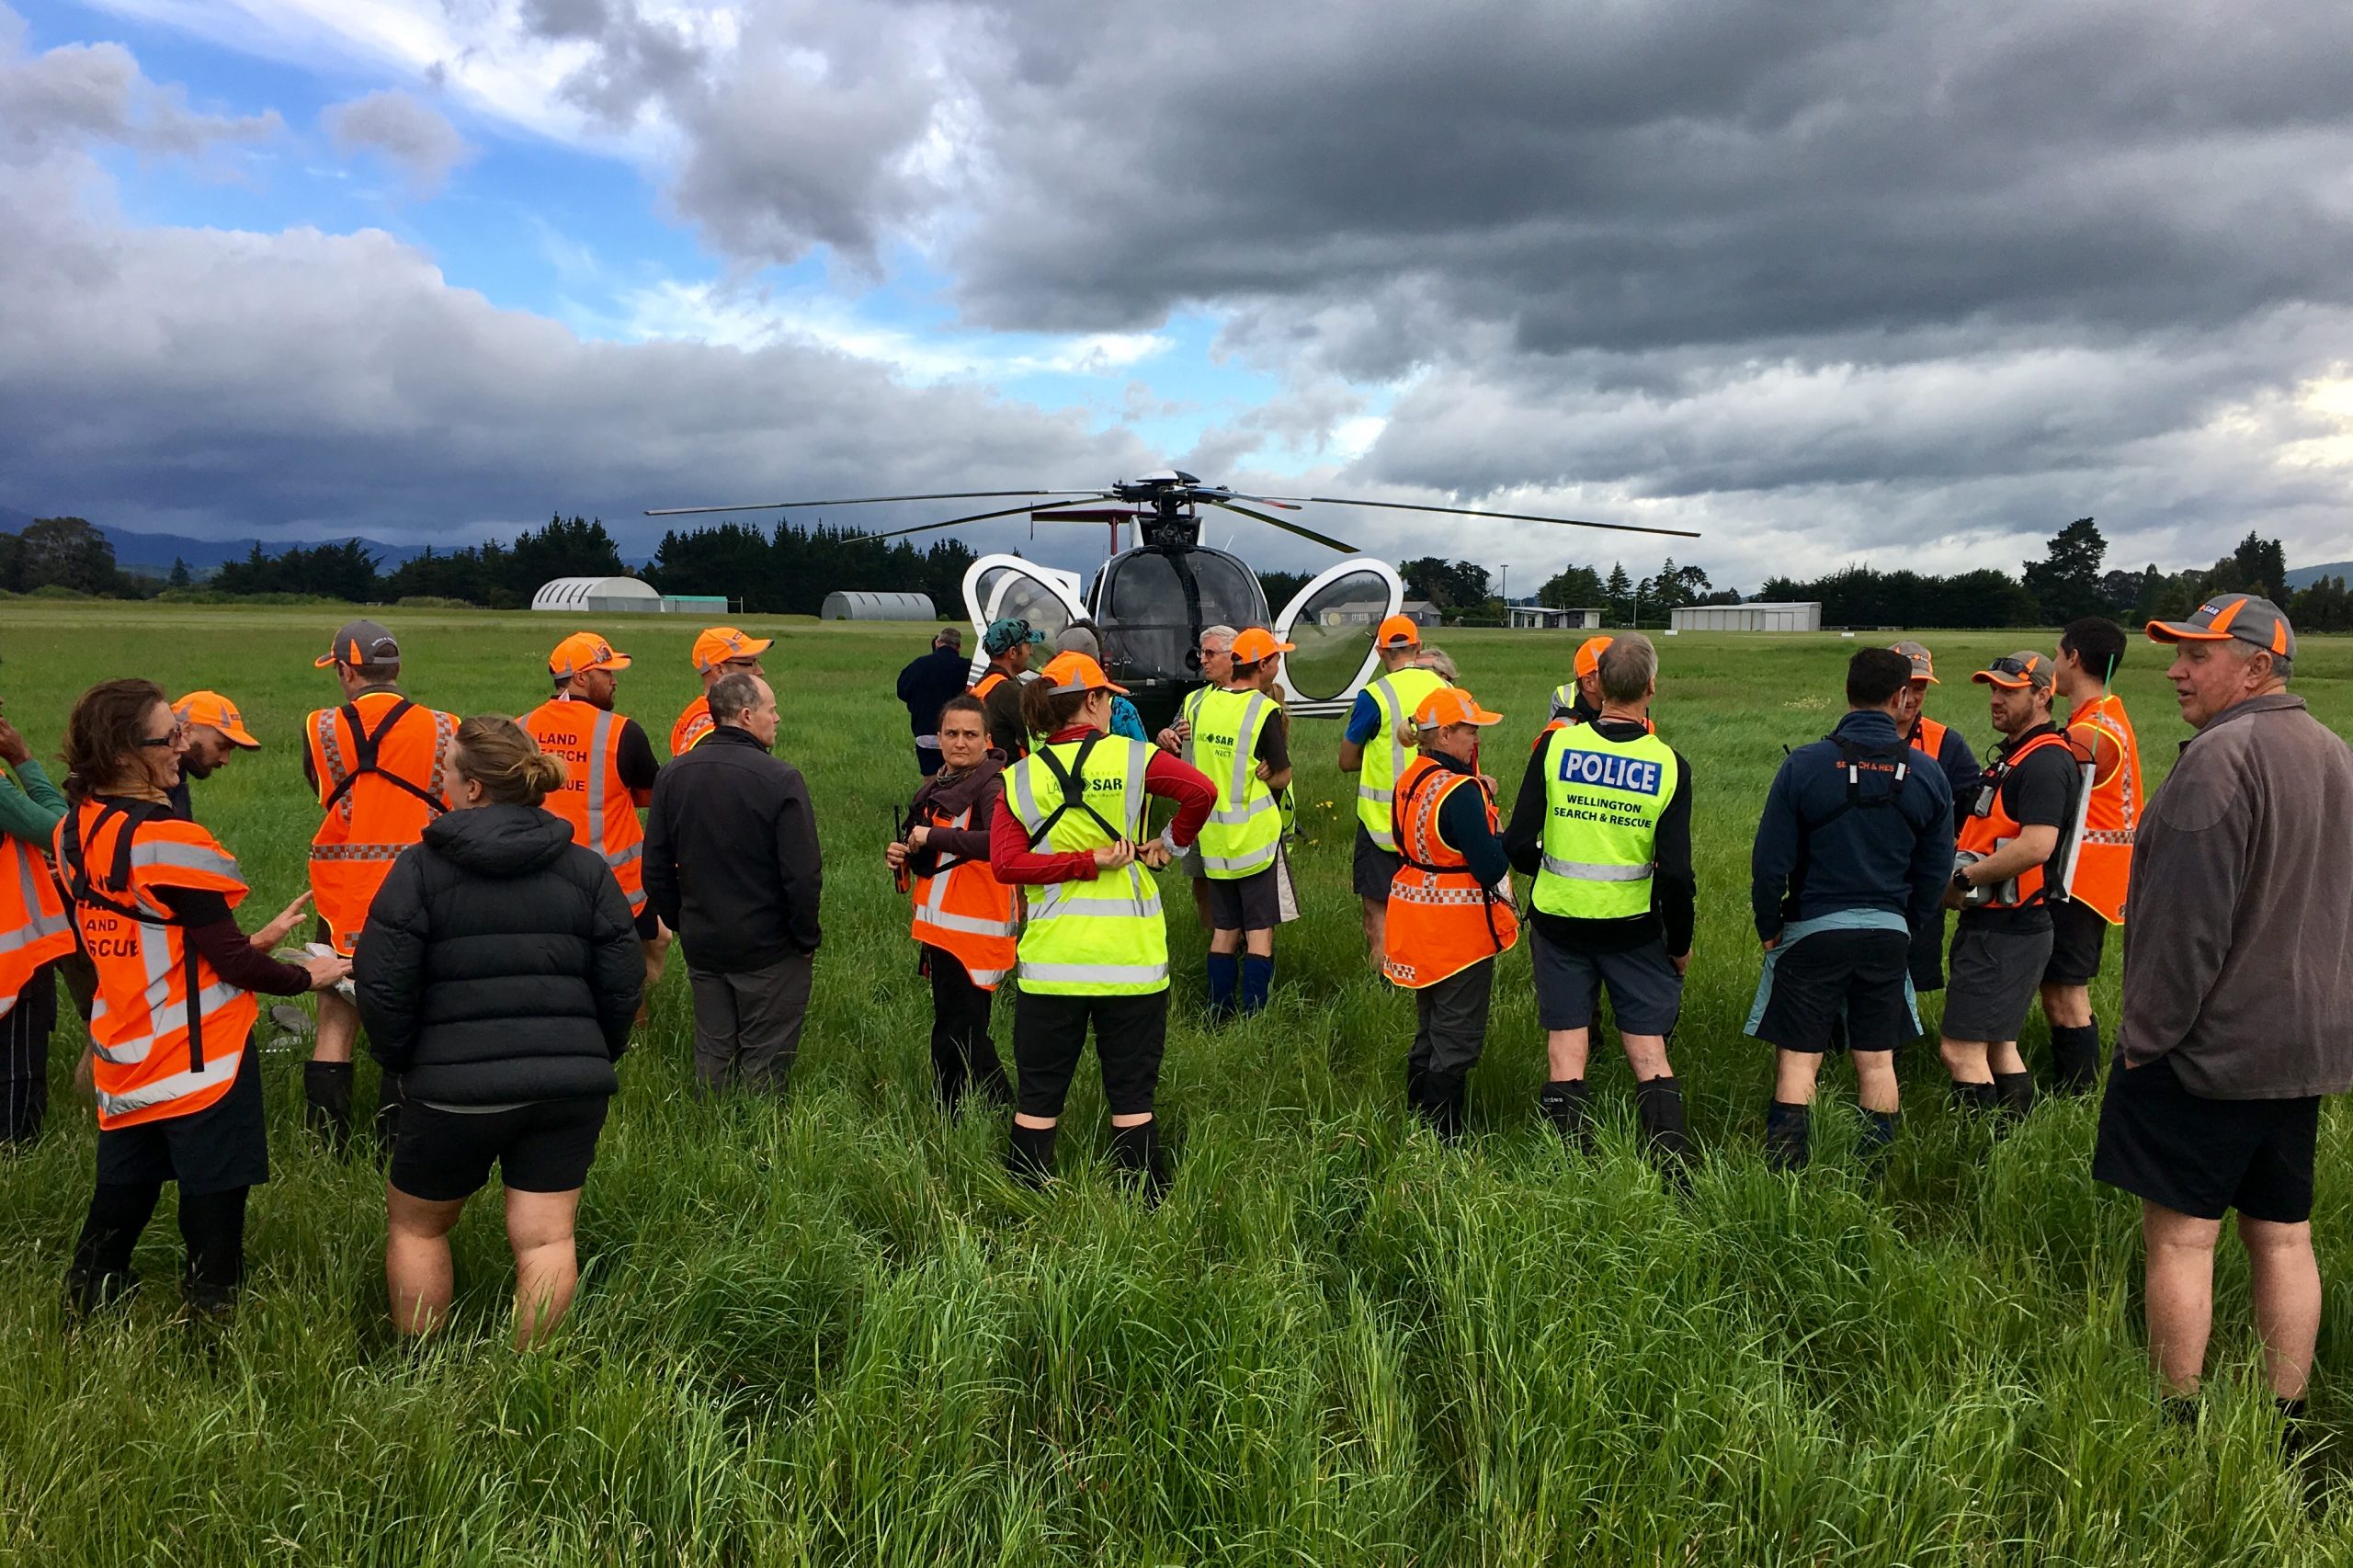 A large group of LandSAR volunteers stand in an open field. They are wearing their hi-vis uniforms, and standing in front of a helicopter.